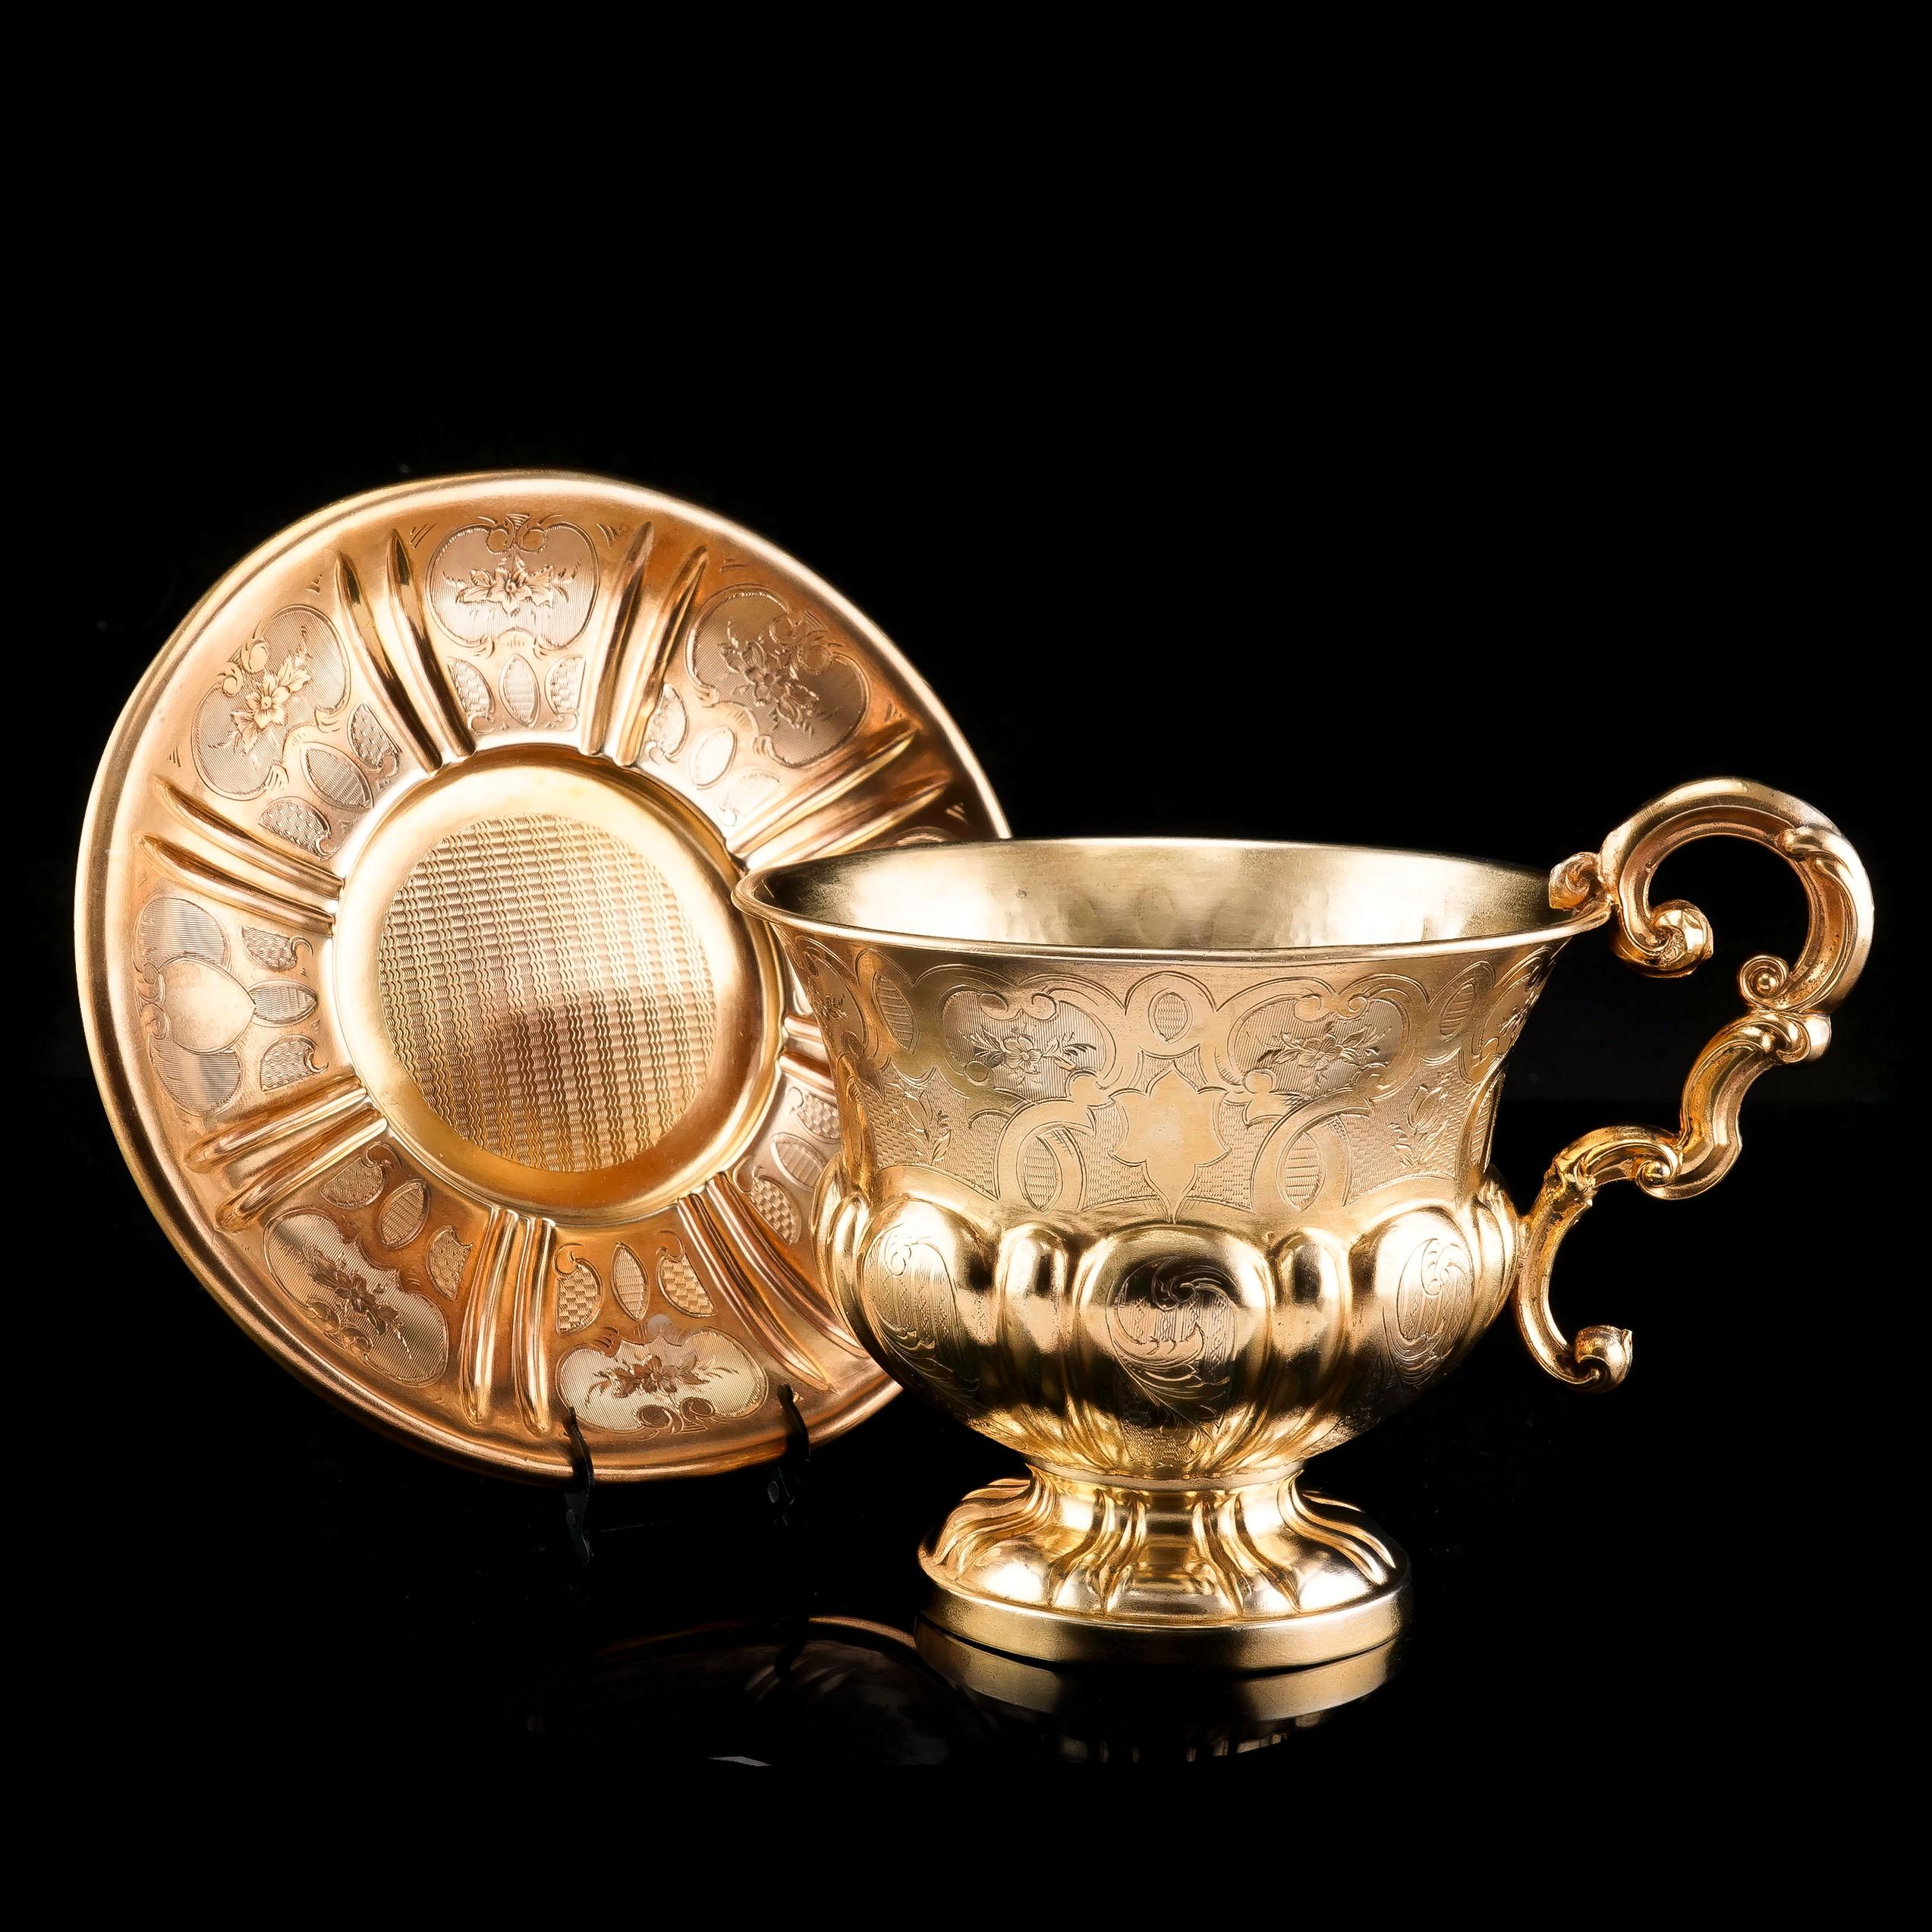 Antique Solid Silver Gilt Cup & Saucer with Fine Engravings, c.1880 For Sale 3